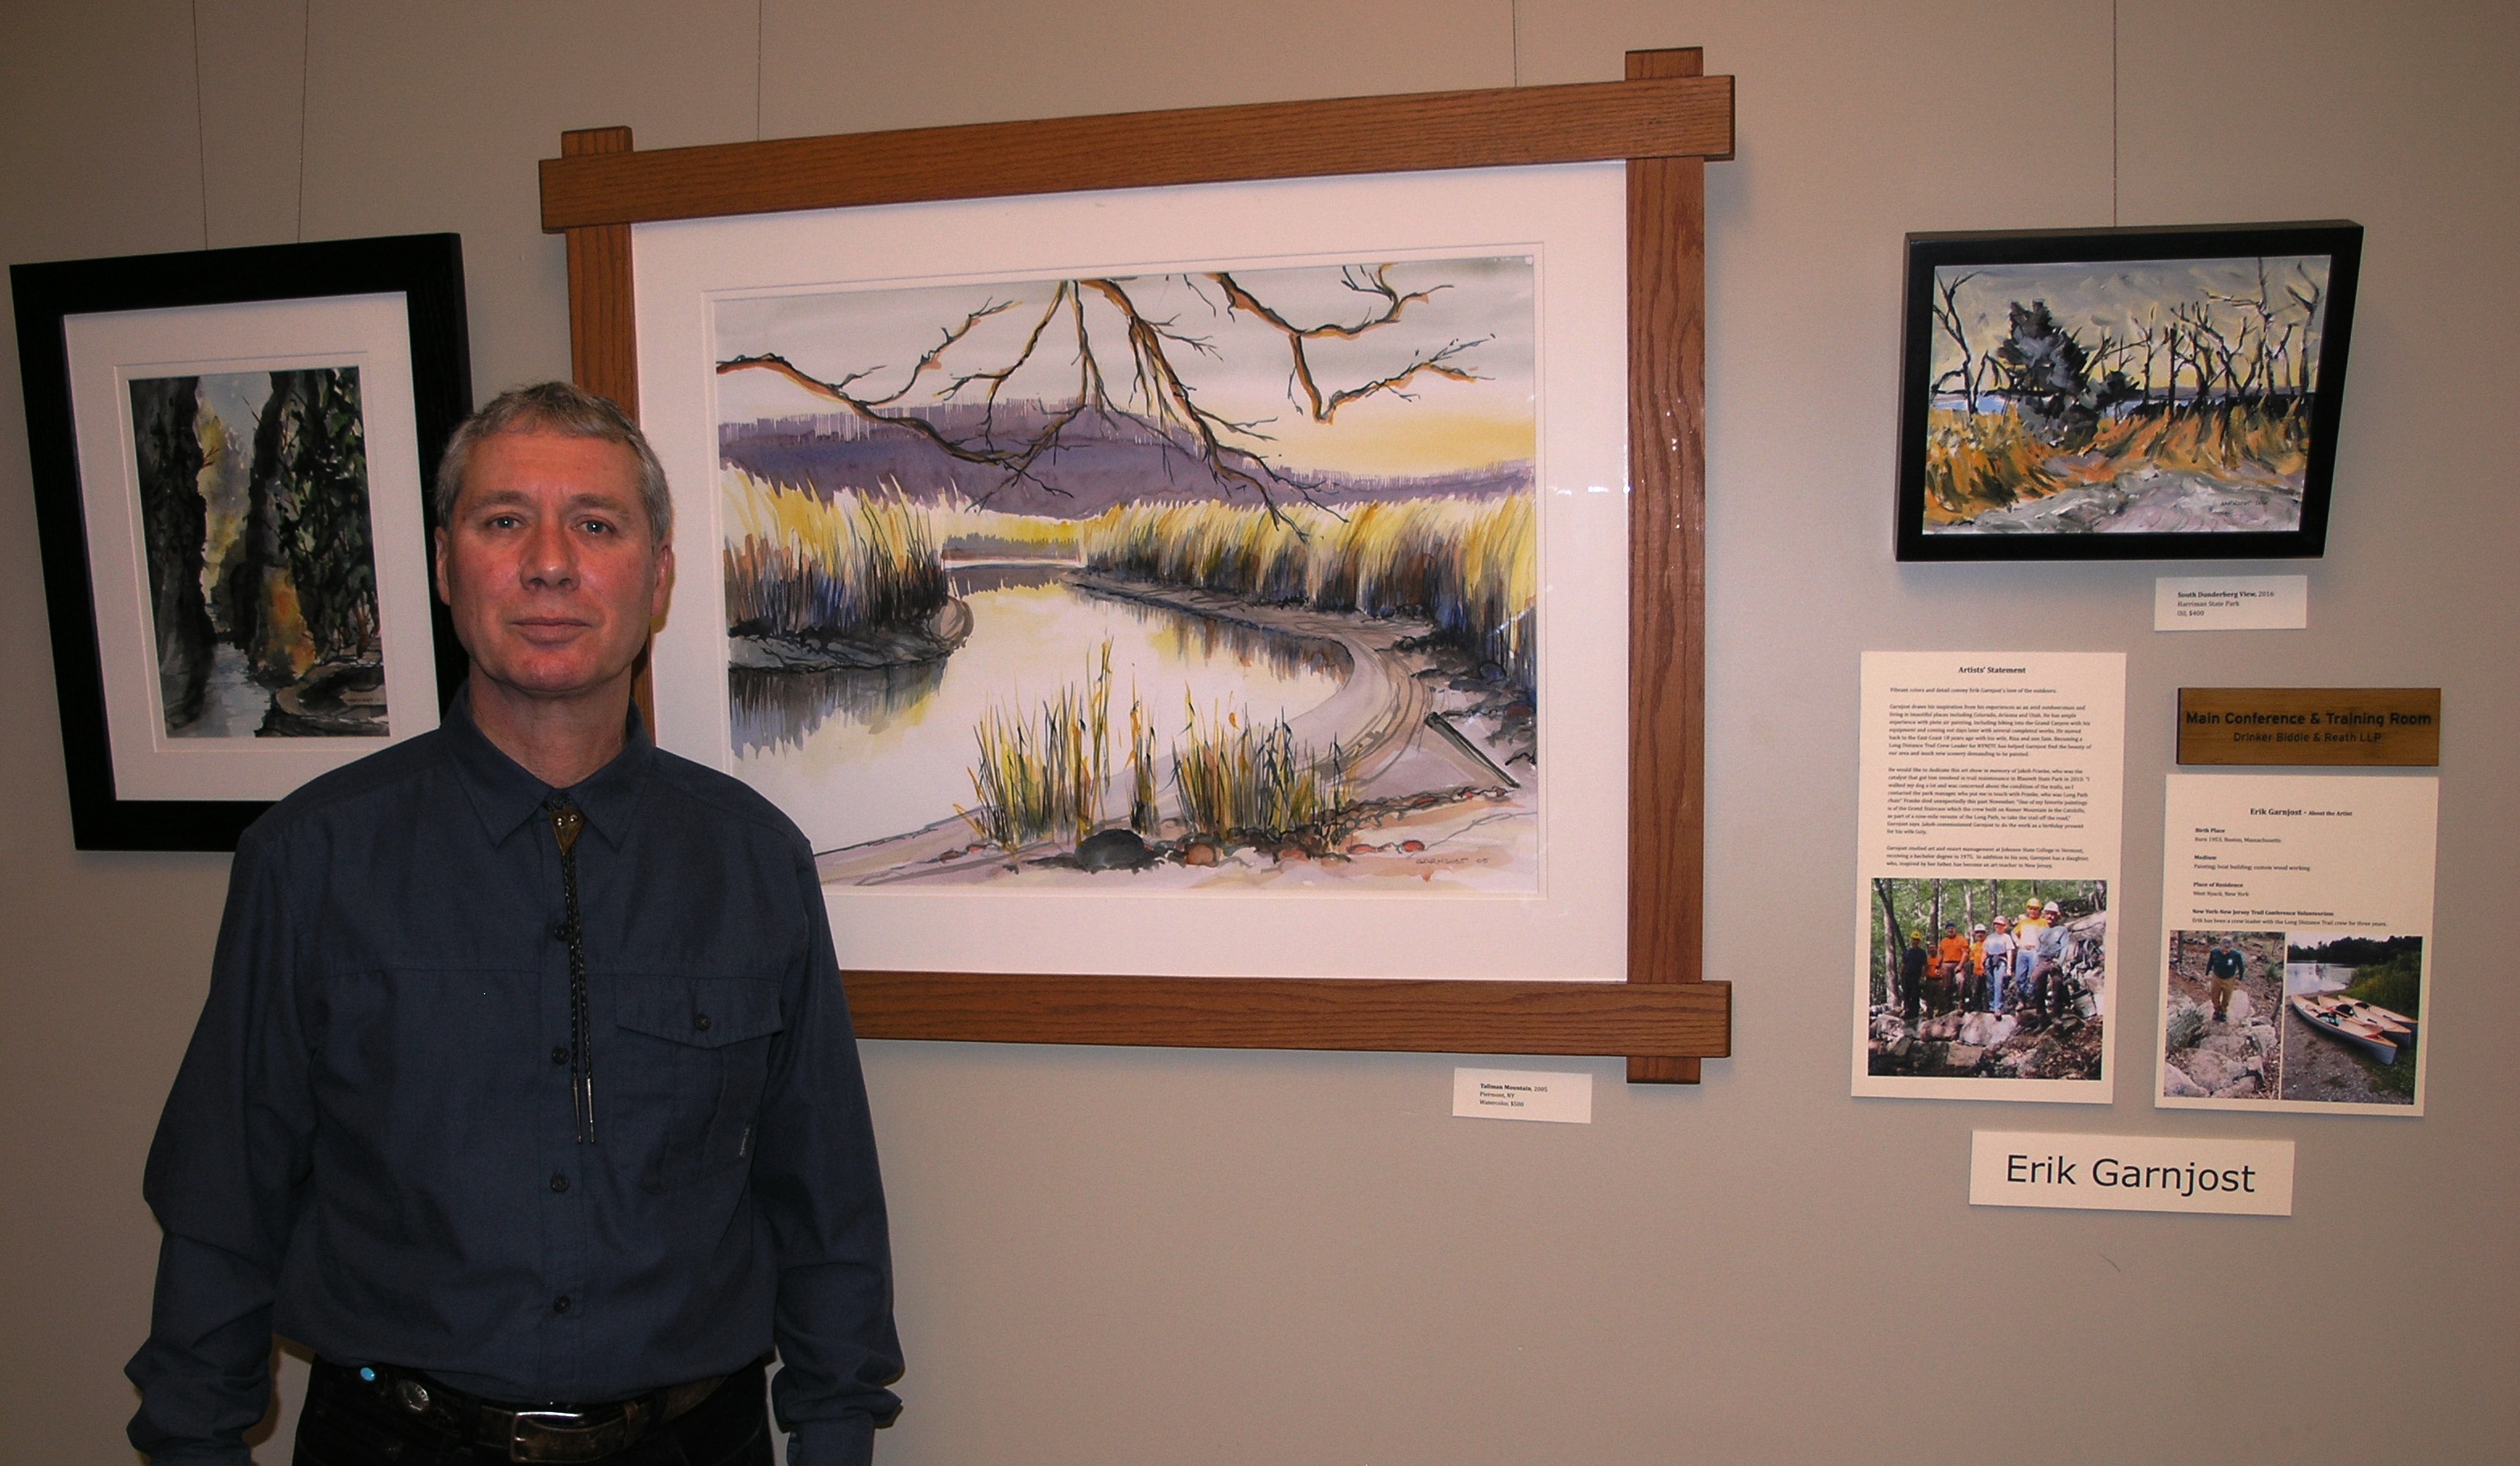 Erik Garnjost attends the opening of his art exhibition at Trail Conference Headquarters. Photo by Andrea Minoff.